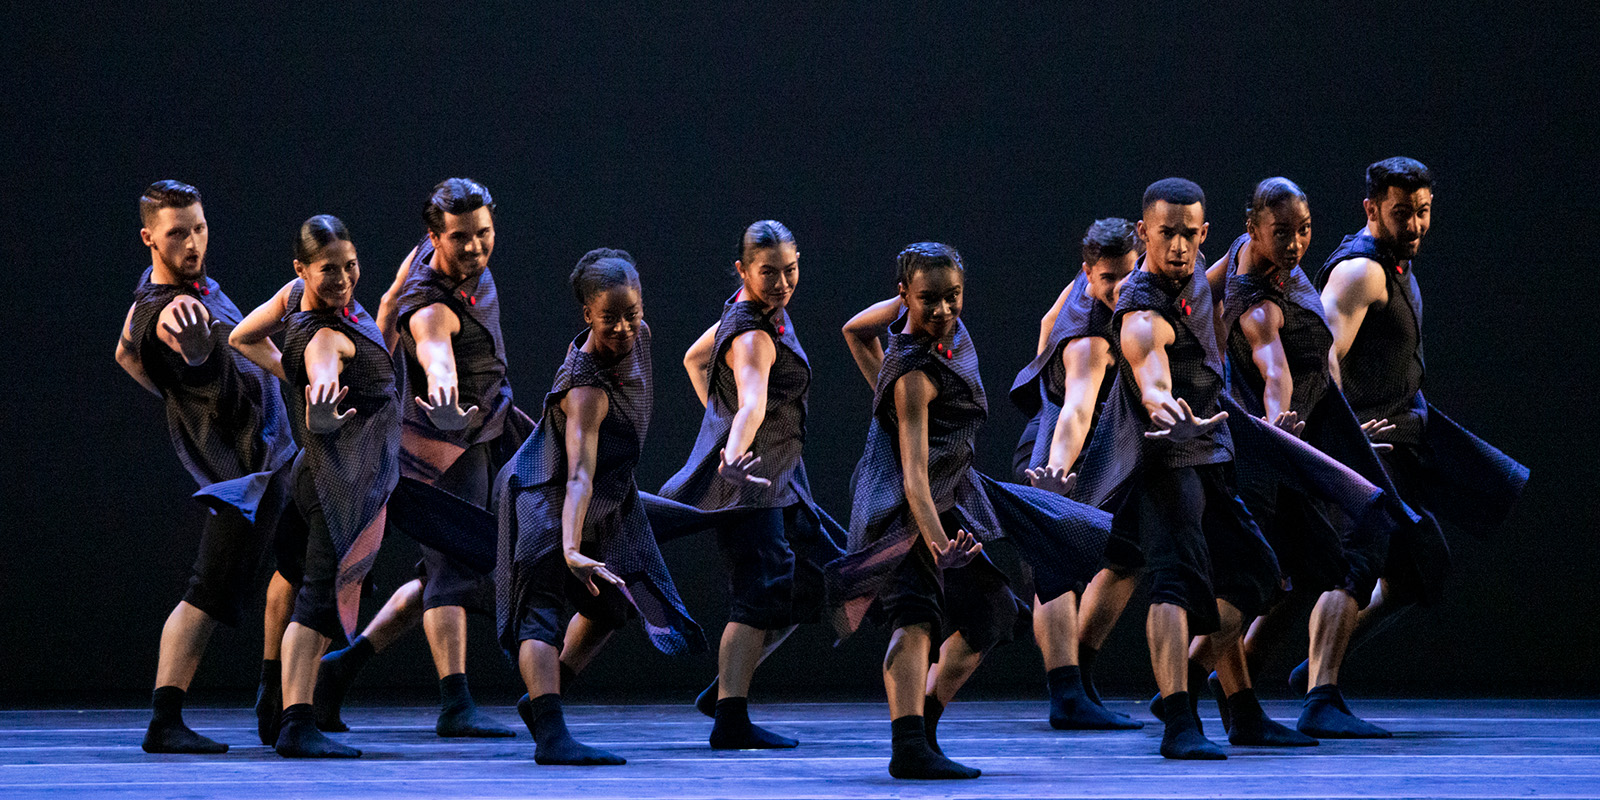 Dancers in dark clothing dance in a line on a dark stage.